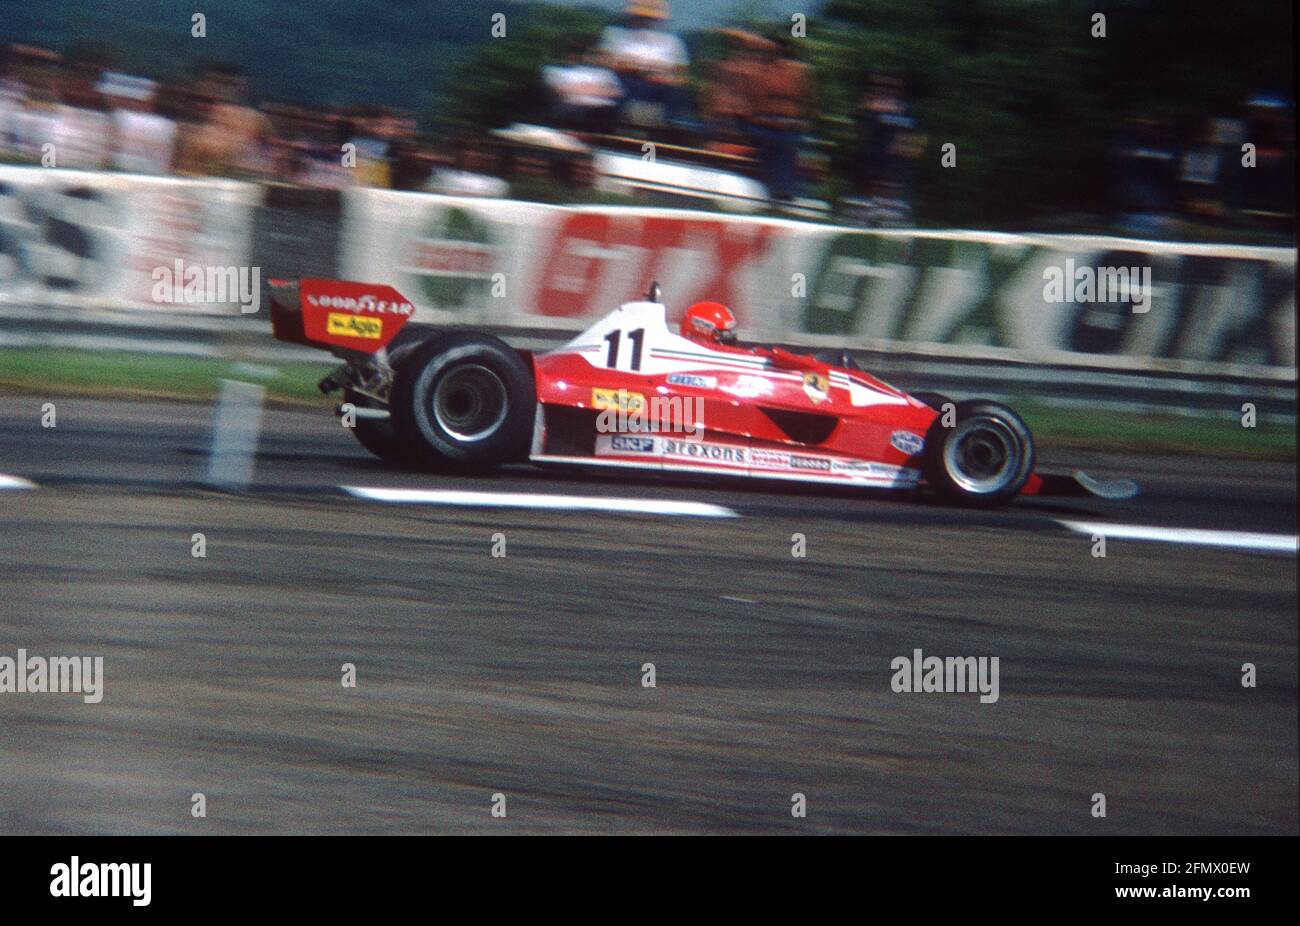 Niki Lauda at speed in the Ferrari 312 T2 during practice for the 1977  British Grand Prix, Silverstone Stock Photo - Alamy